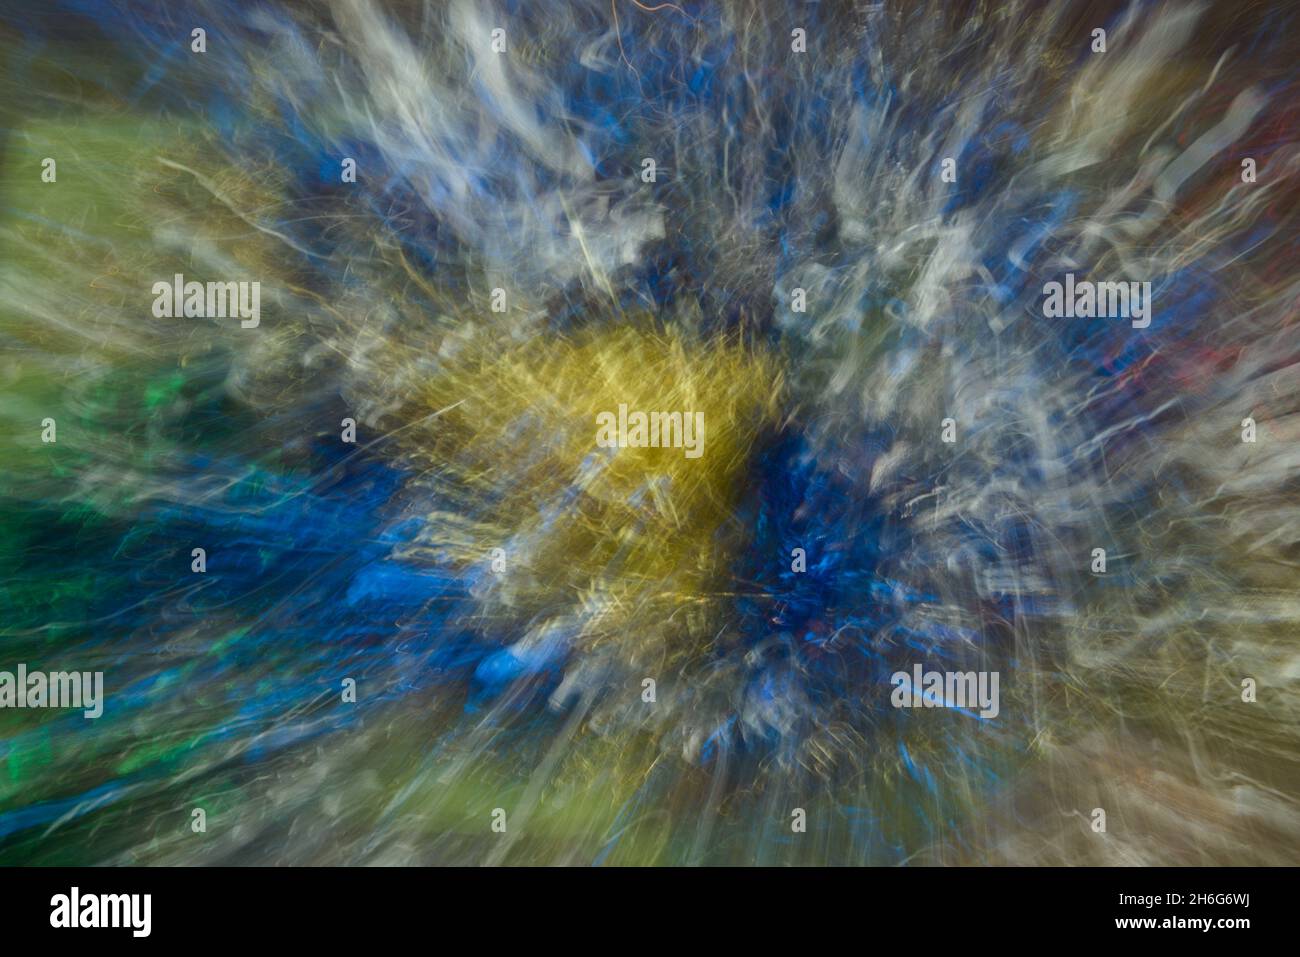 Bursting  colors, abstract of metallic  patterns, lines of blues, yellows, reds, golds, green was created by zooming & twisting camera. Color fusion. Stock Photo